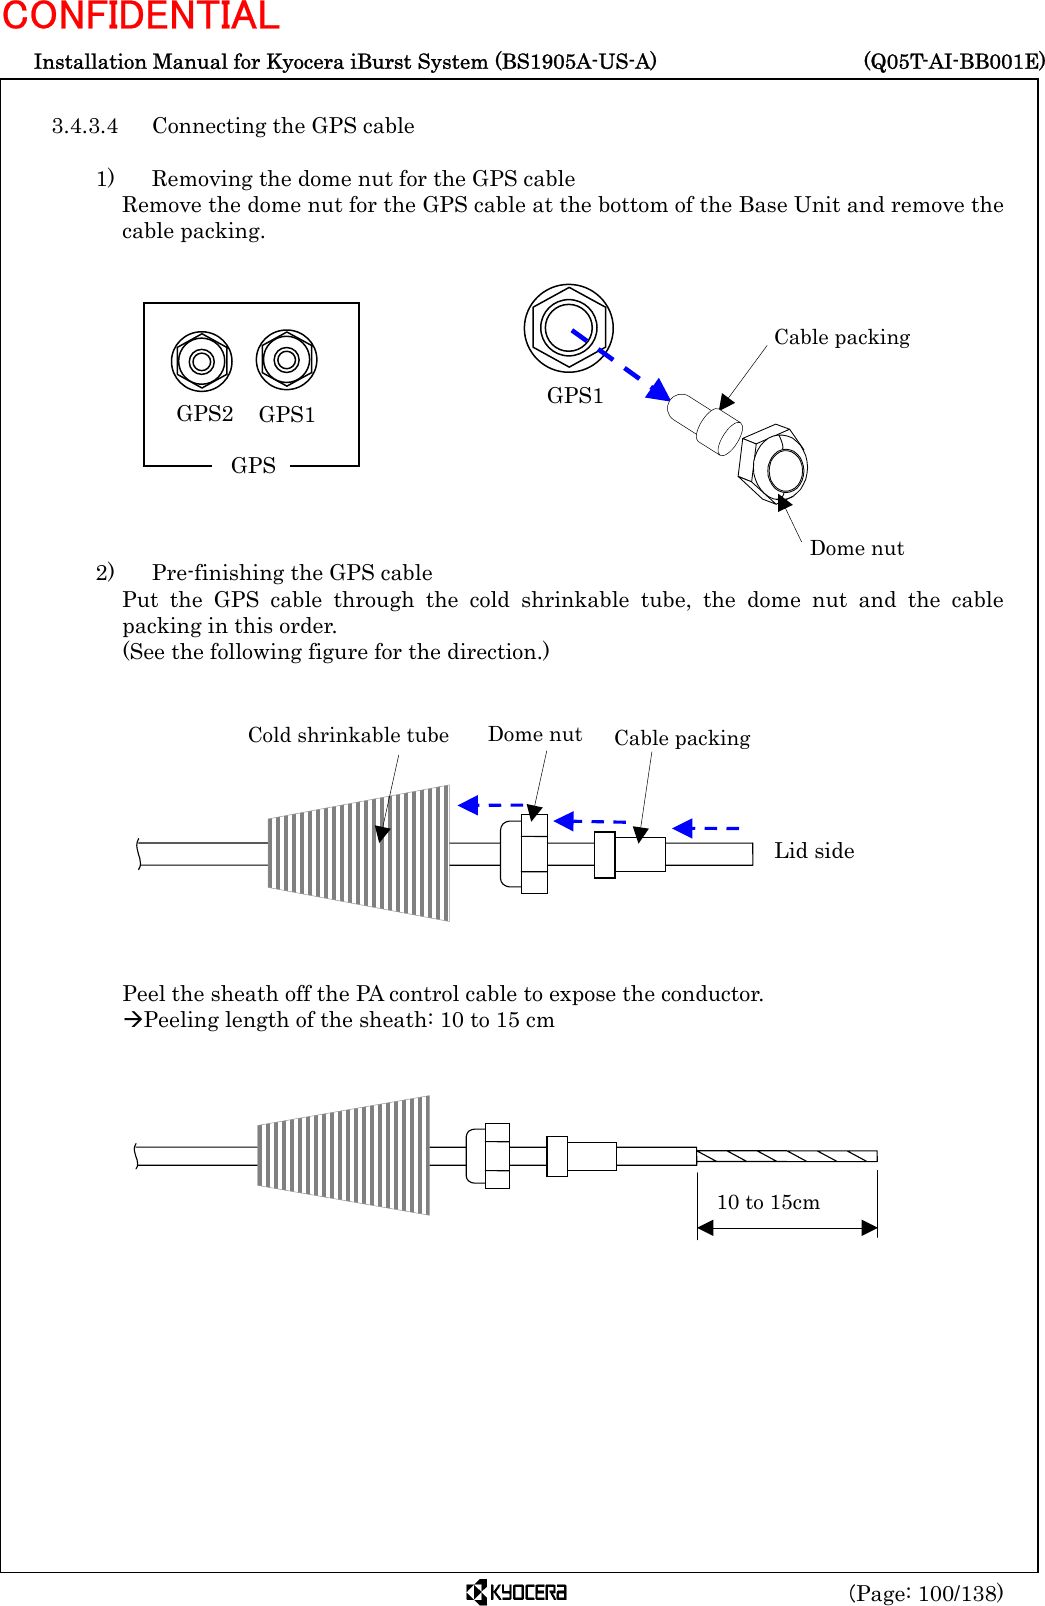  Installation Manual for Kyocera iBurst System (BS1905A-US-A)     (Q05T-AI-BB001E) (Page: 100/138) CONFIDENTIAL  3.4.3.4  Connecting the GPS cable    1)    Removing the dome nut for the GPS cable Remove the dome nut for the GPS cable at the bottom of the Base Unit and remove the cable packing.             2)    Pre-finishing the GPS cable Put the GPS cable through the cold shrinkable tube, the dome nut and the cable packing in this order.   (See the following figure for the direction.)             Peel the sheath off the PA control cable to expose the conductor. ÆPeeling length of the sheath: 10 to 15 cm             Cable packing Dome nut GPS1 10 to 15cm Cold shrinkable tube Dome nut  Cable packing Lid side GPS1 GPS2 GPS 